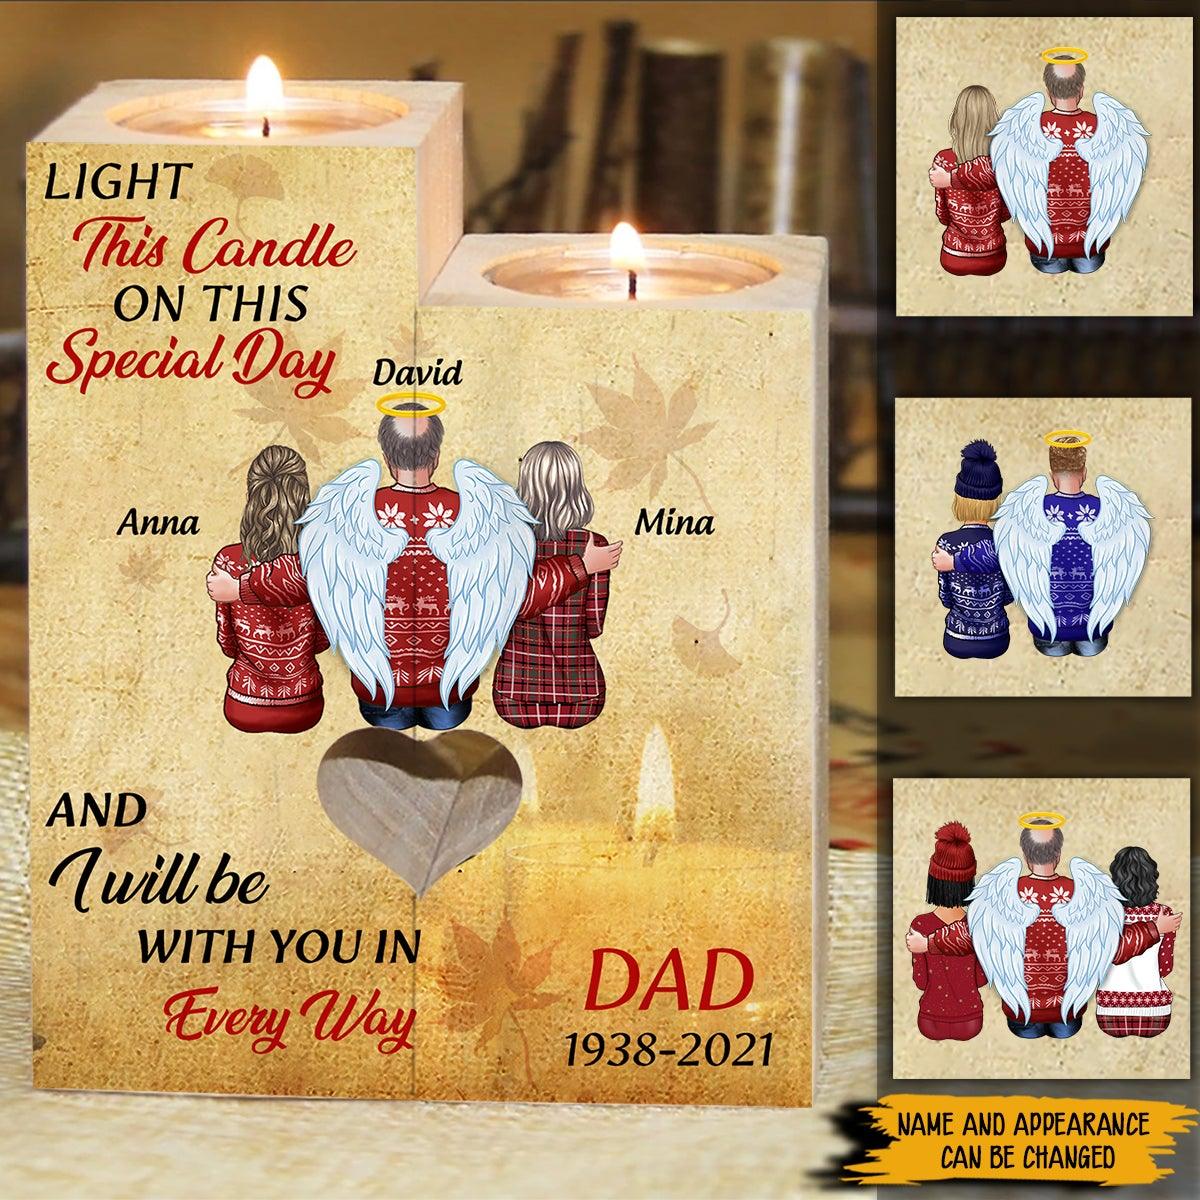 Memorial Custom Wooden Candle Light This Candle On This Special Day Personalized Gift - PERSONAL84